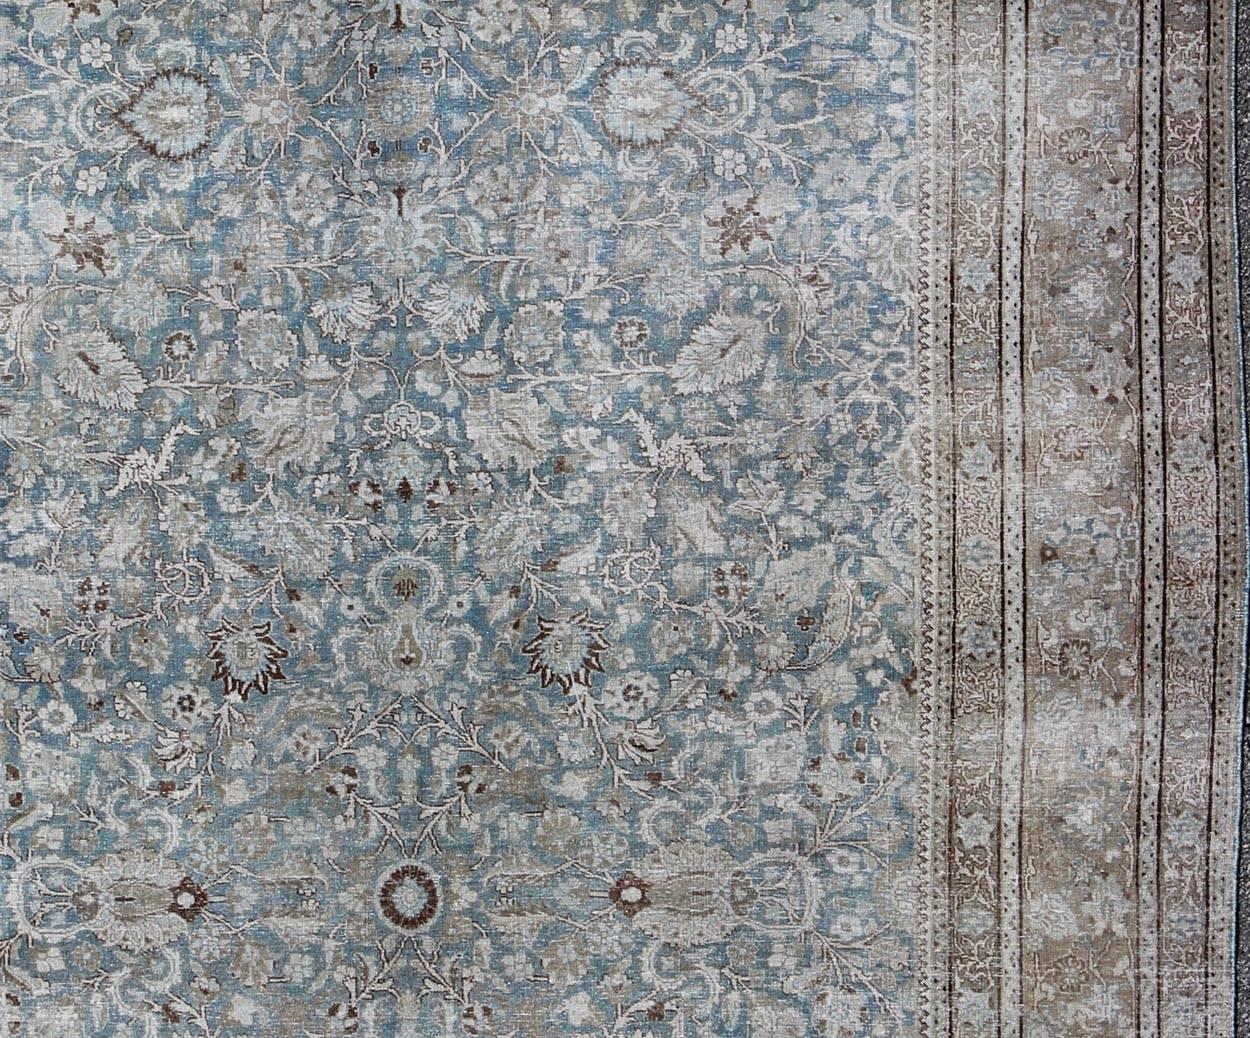 Hand-Knotted Square Antique Persian Tabriz in Grey, Blue and Brown with Floral Design